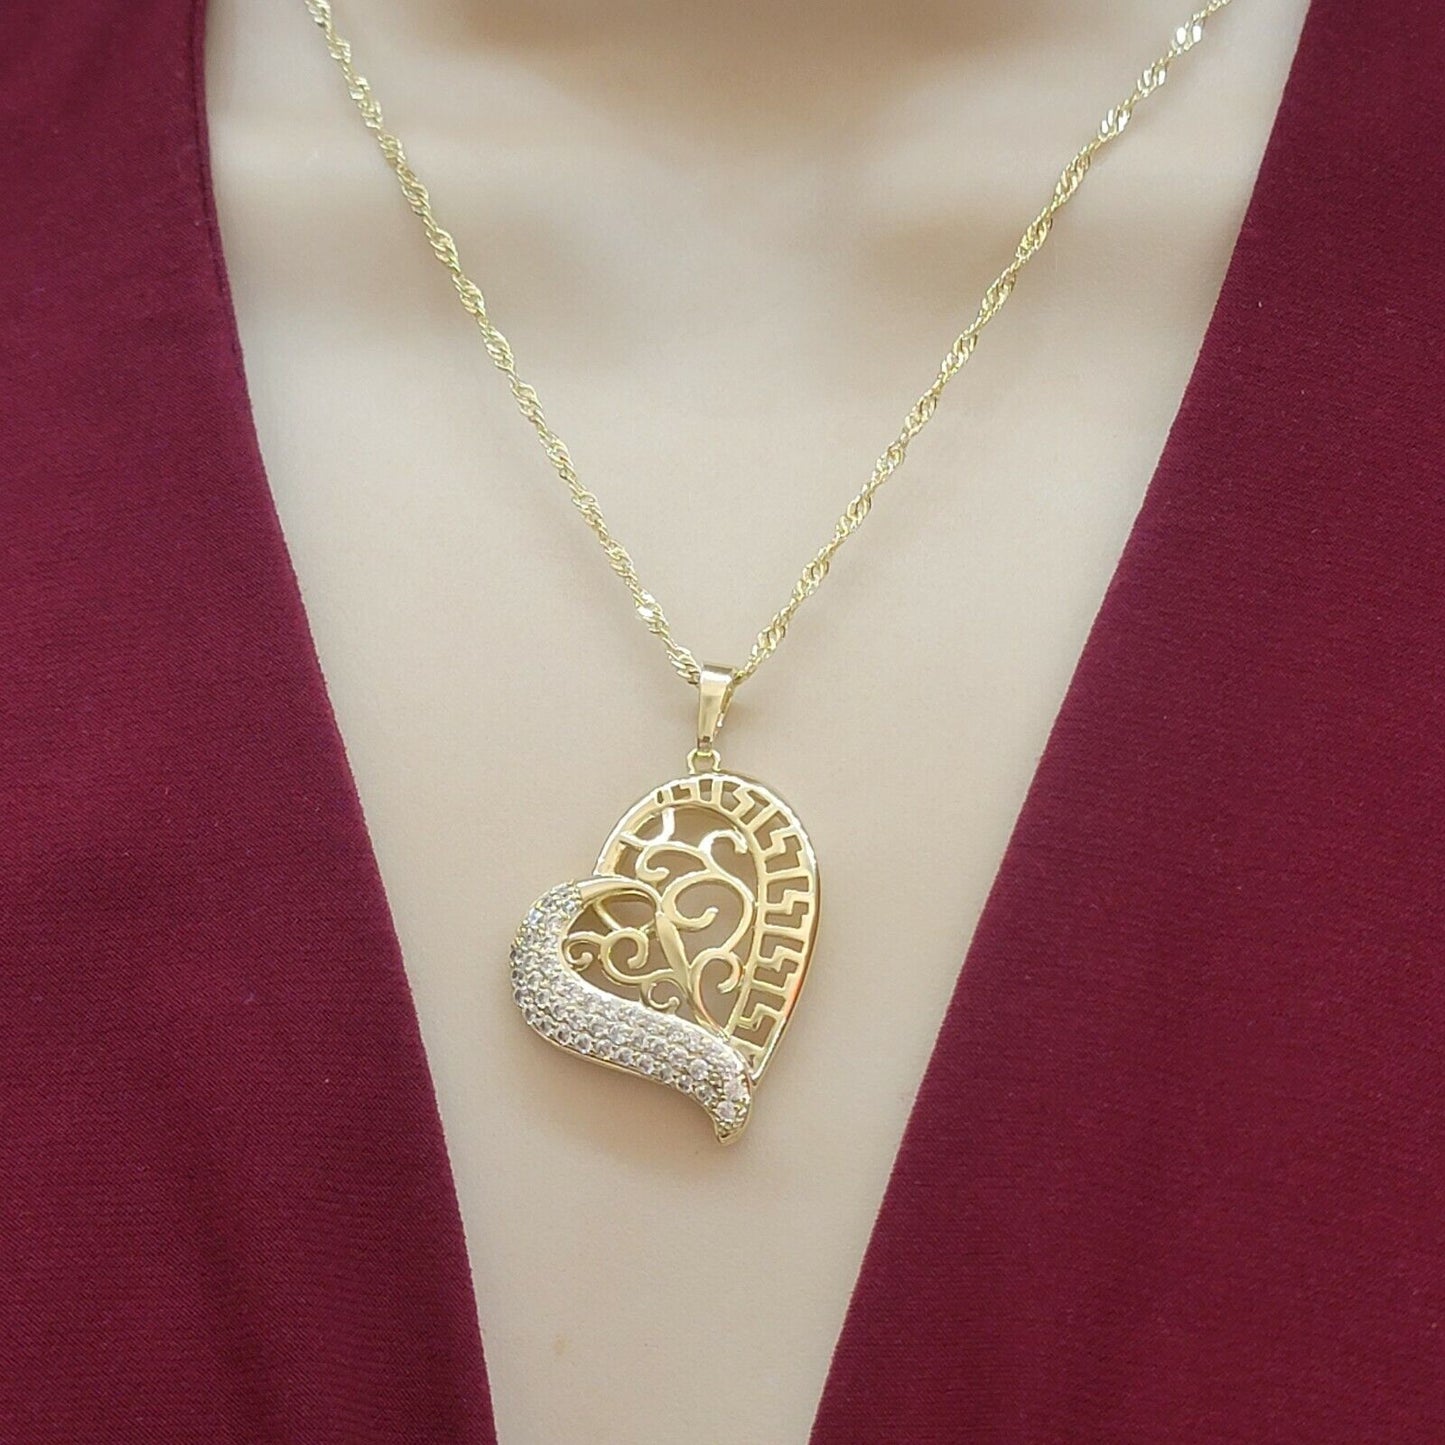 Necklaces - 14K Gold Plated. Crystal Greek Design HEART Pendant & Chain.